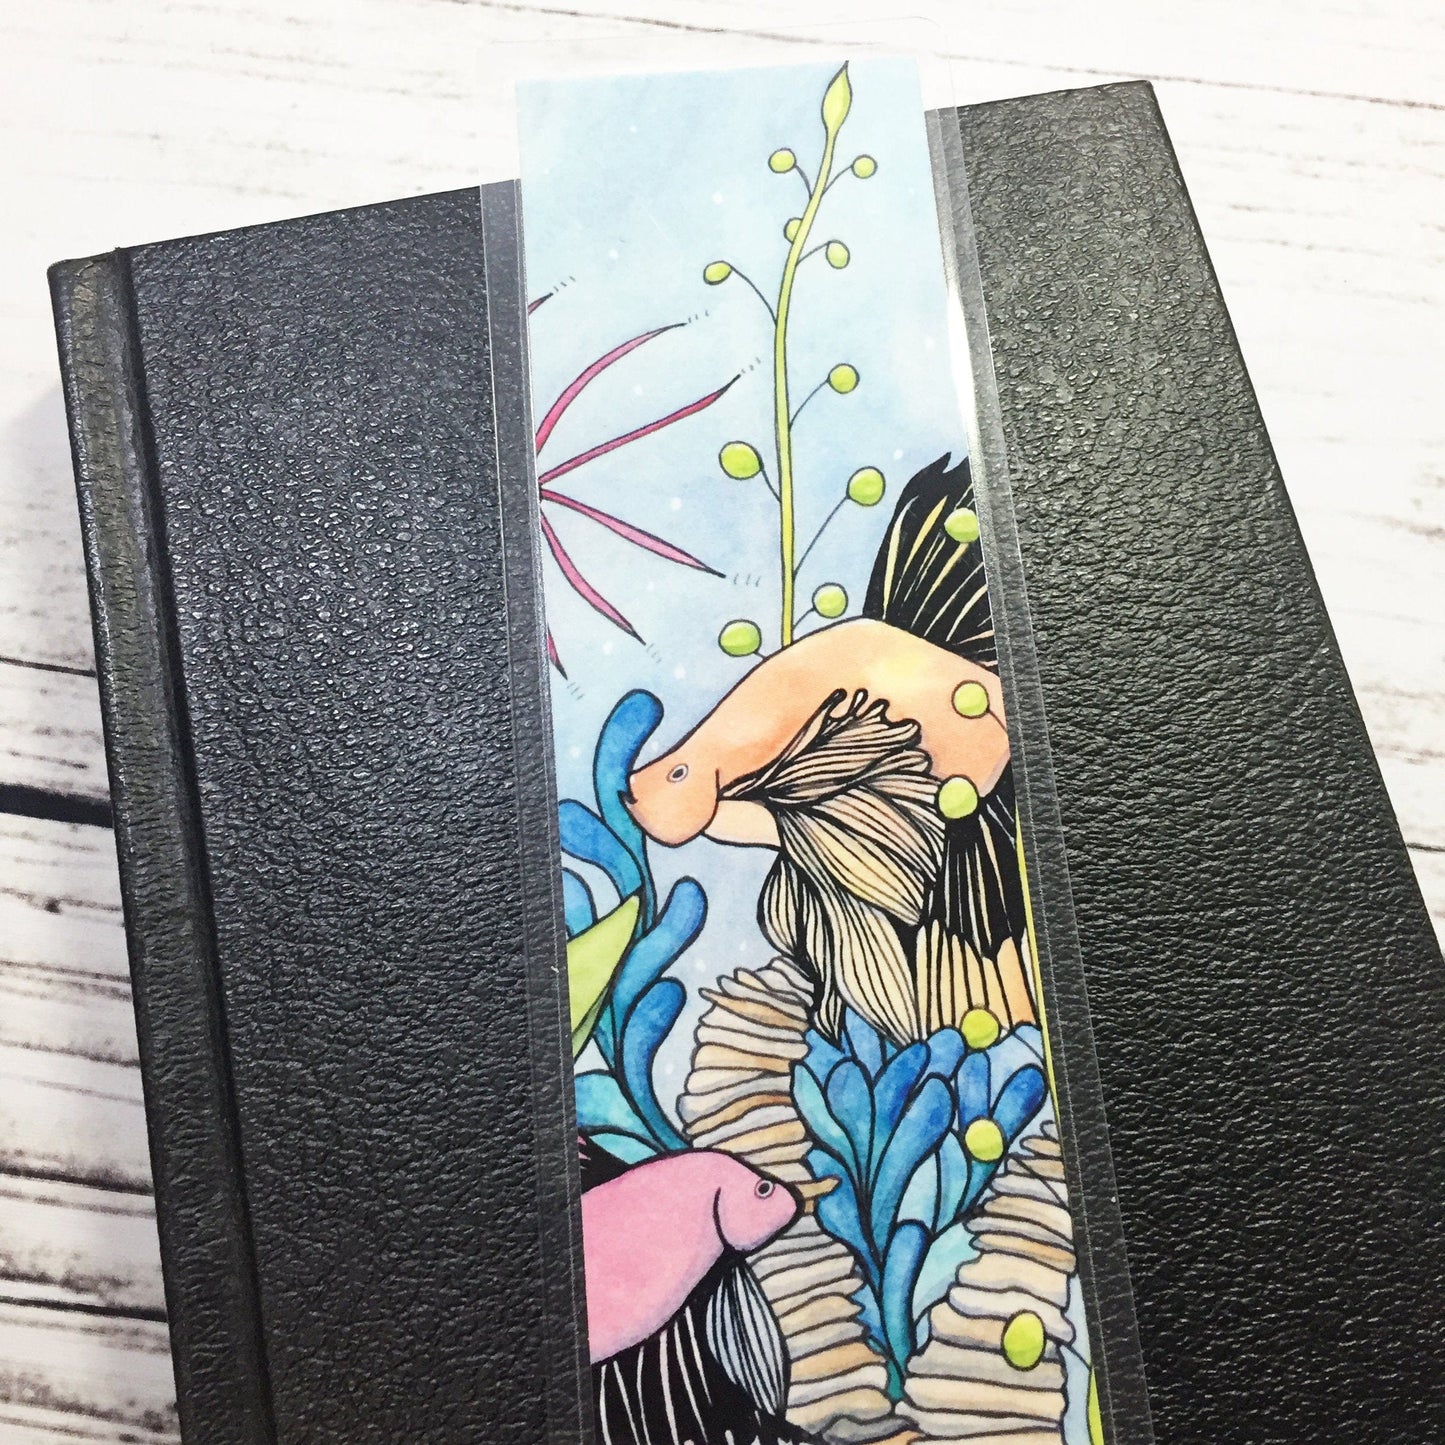 PinkPolish Design Bookmarks "Quest of the Goldfish" 2-Sided Bookmark